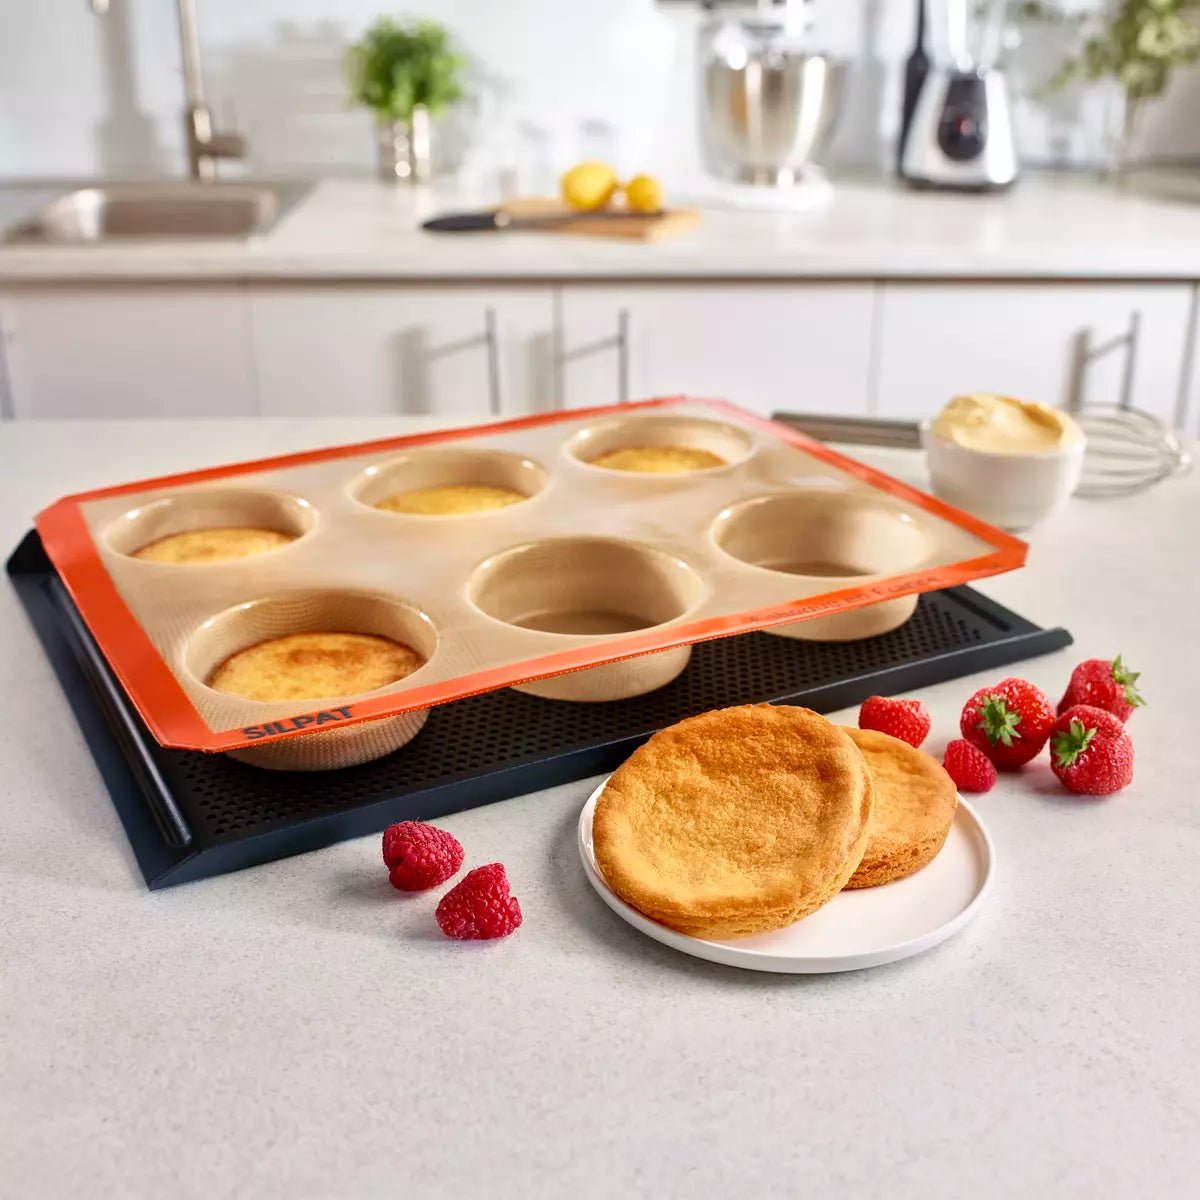 Silpat | Reusable Silicone Baking Molds 6 Hole Large Round